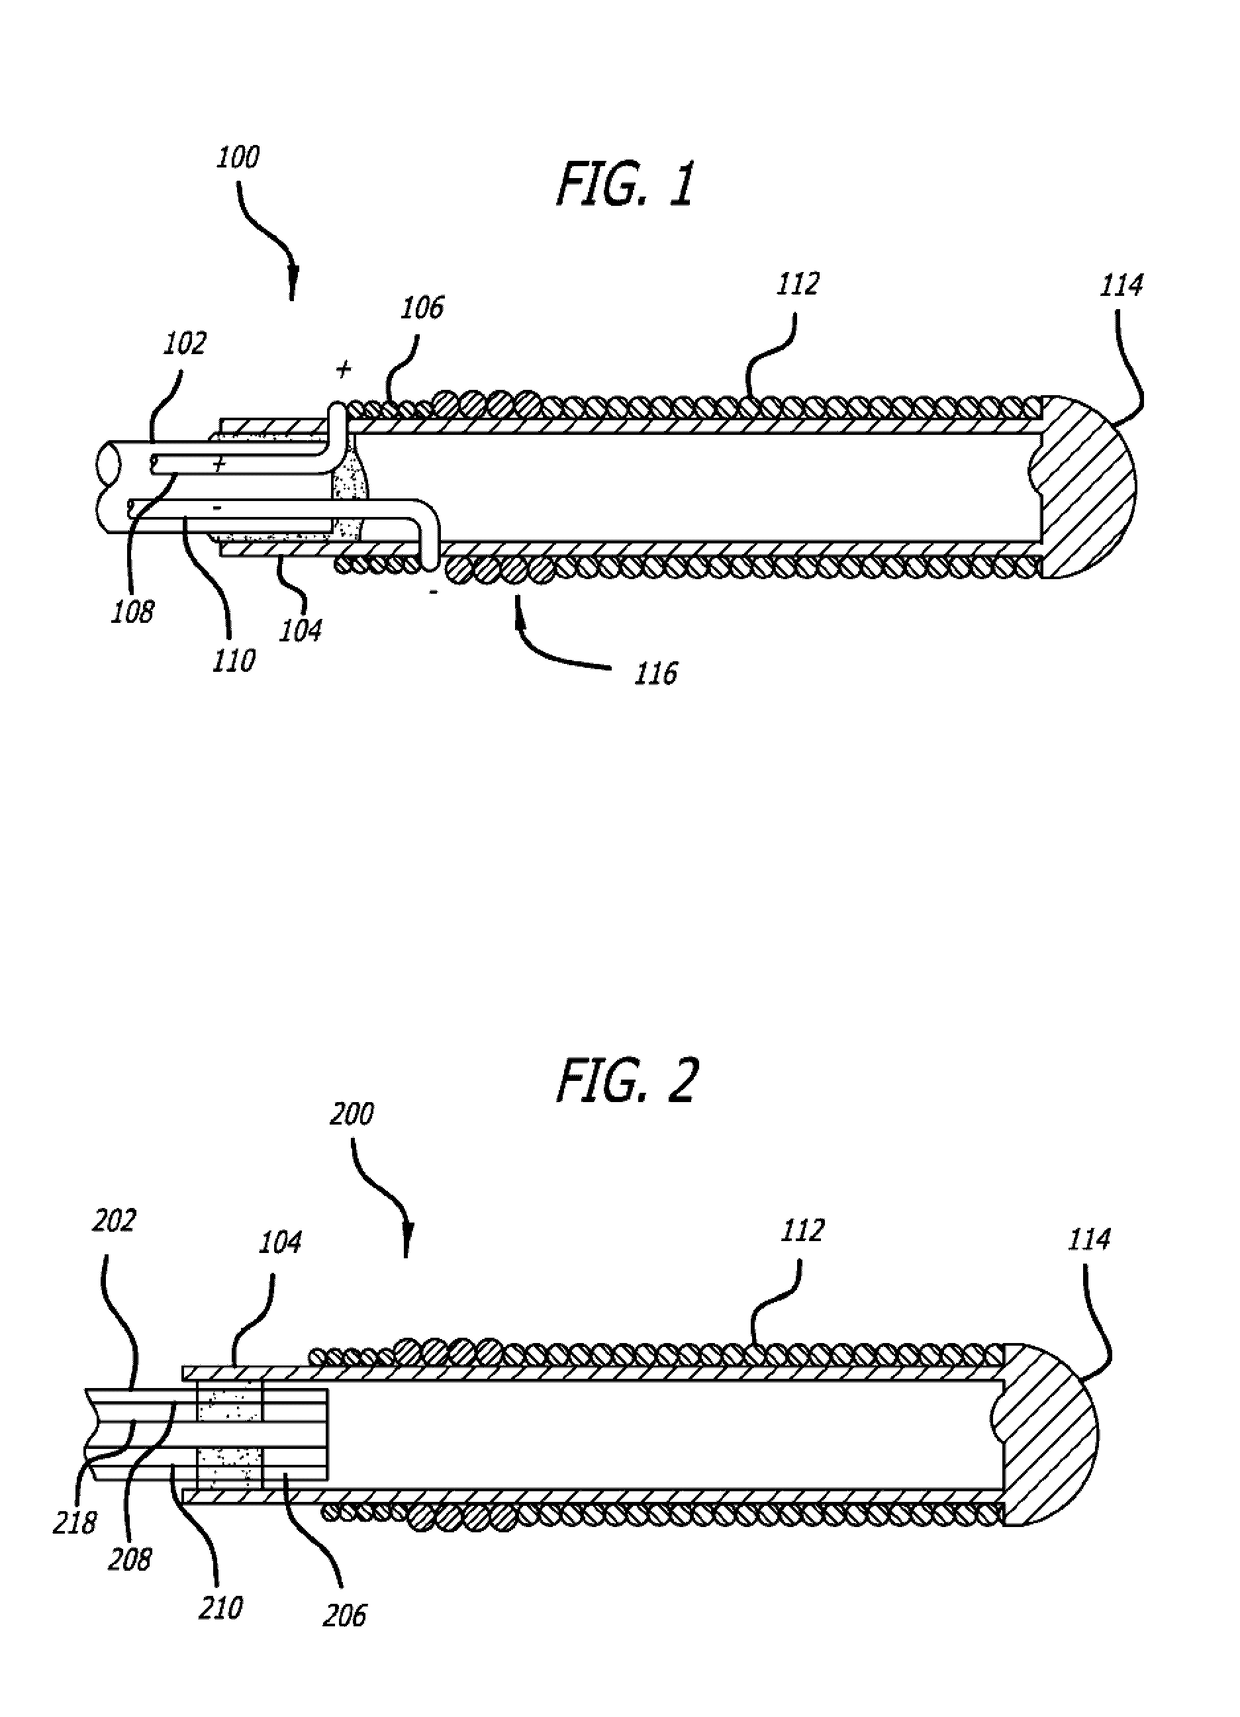 Implant delivery device